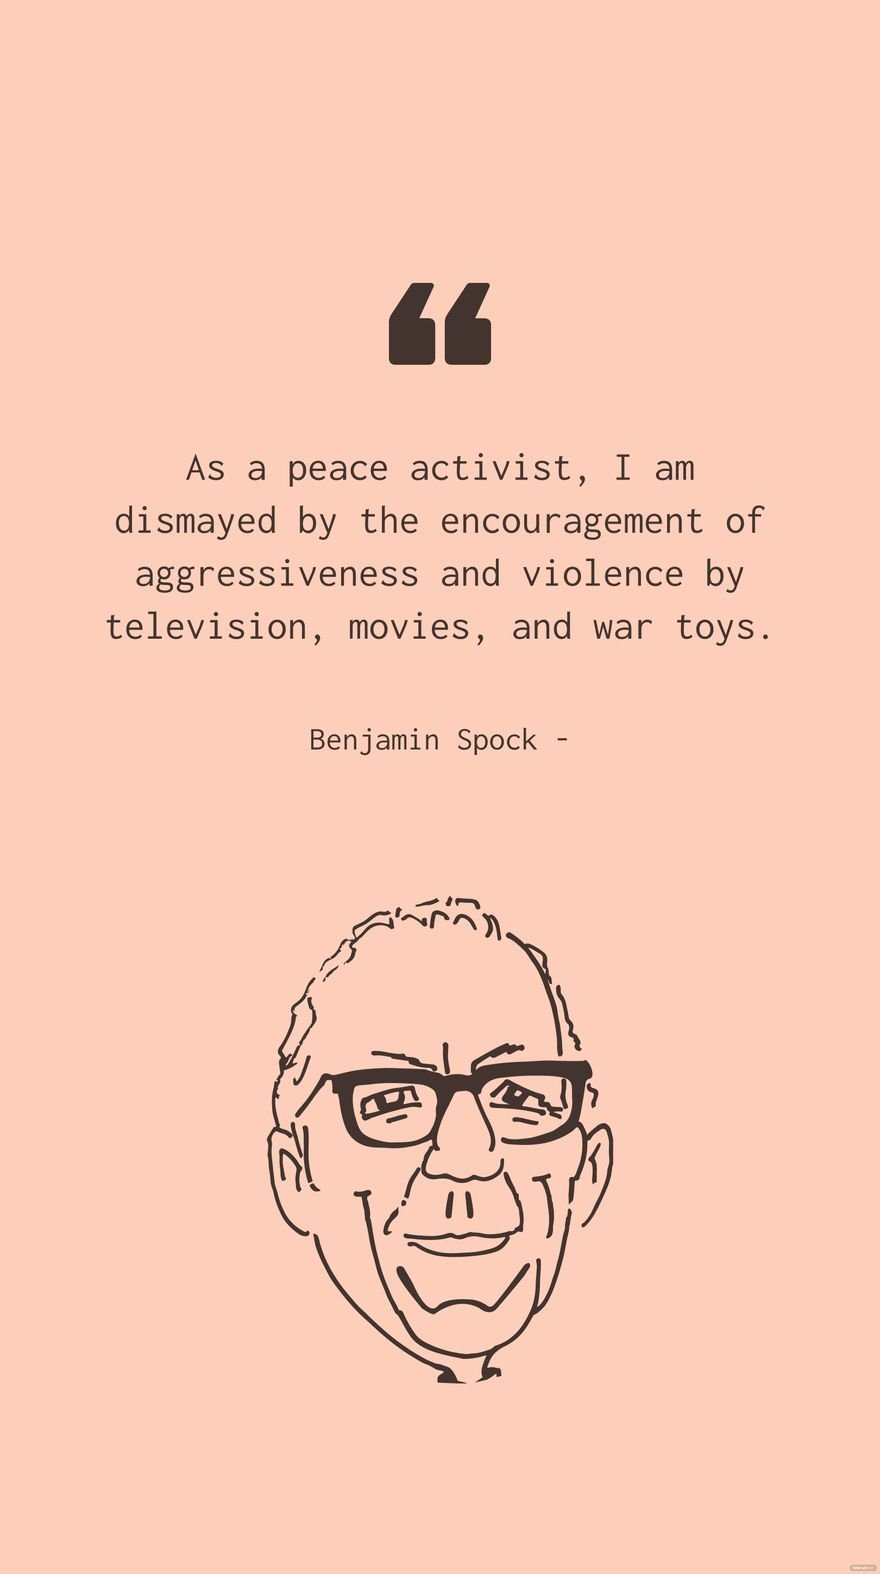 Free Benjamin Spock - As a peace activist, I am dismayed by the encouragement of aggressiveness and violence by television, movies, and war toys. Template